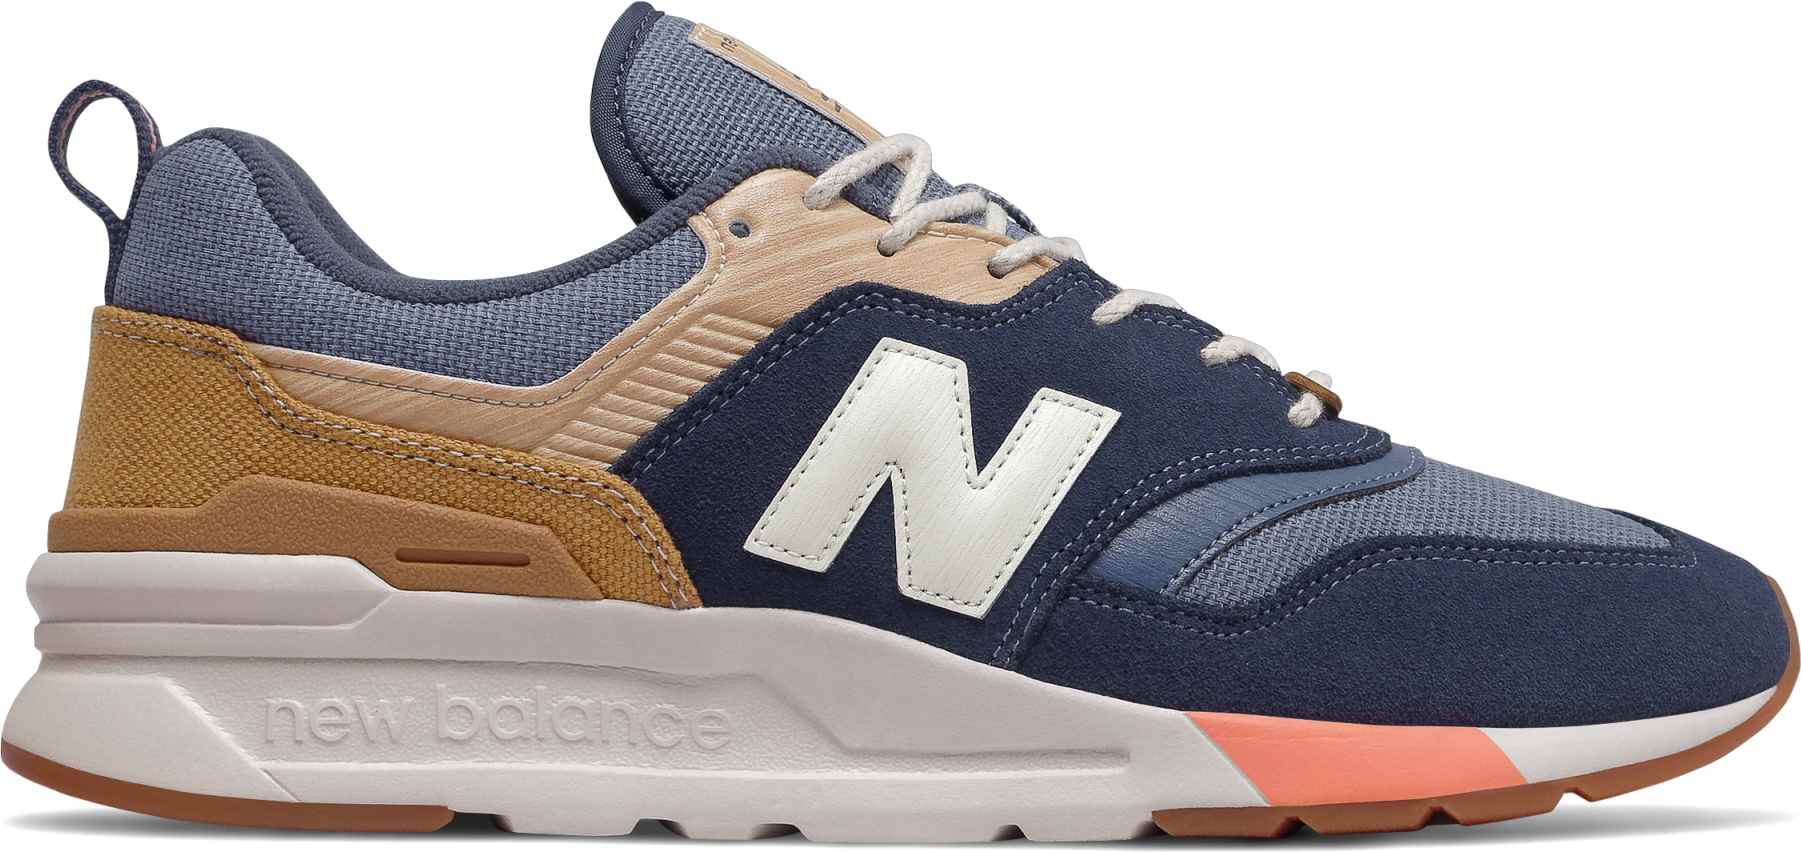 new balance 986 Online Shopping mall | Find the best prices and ...